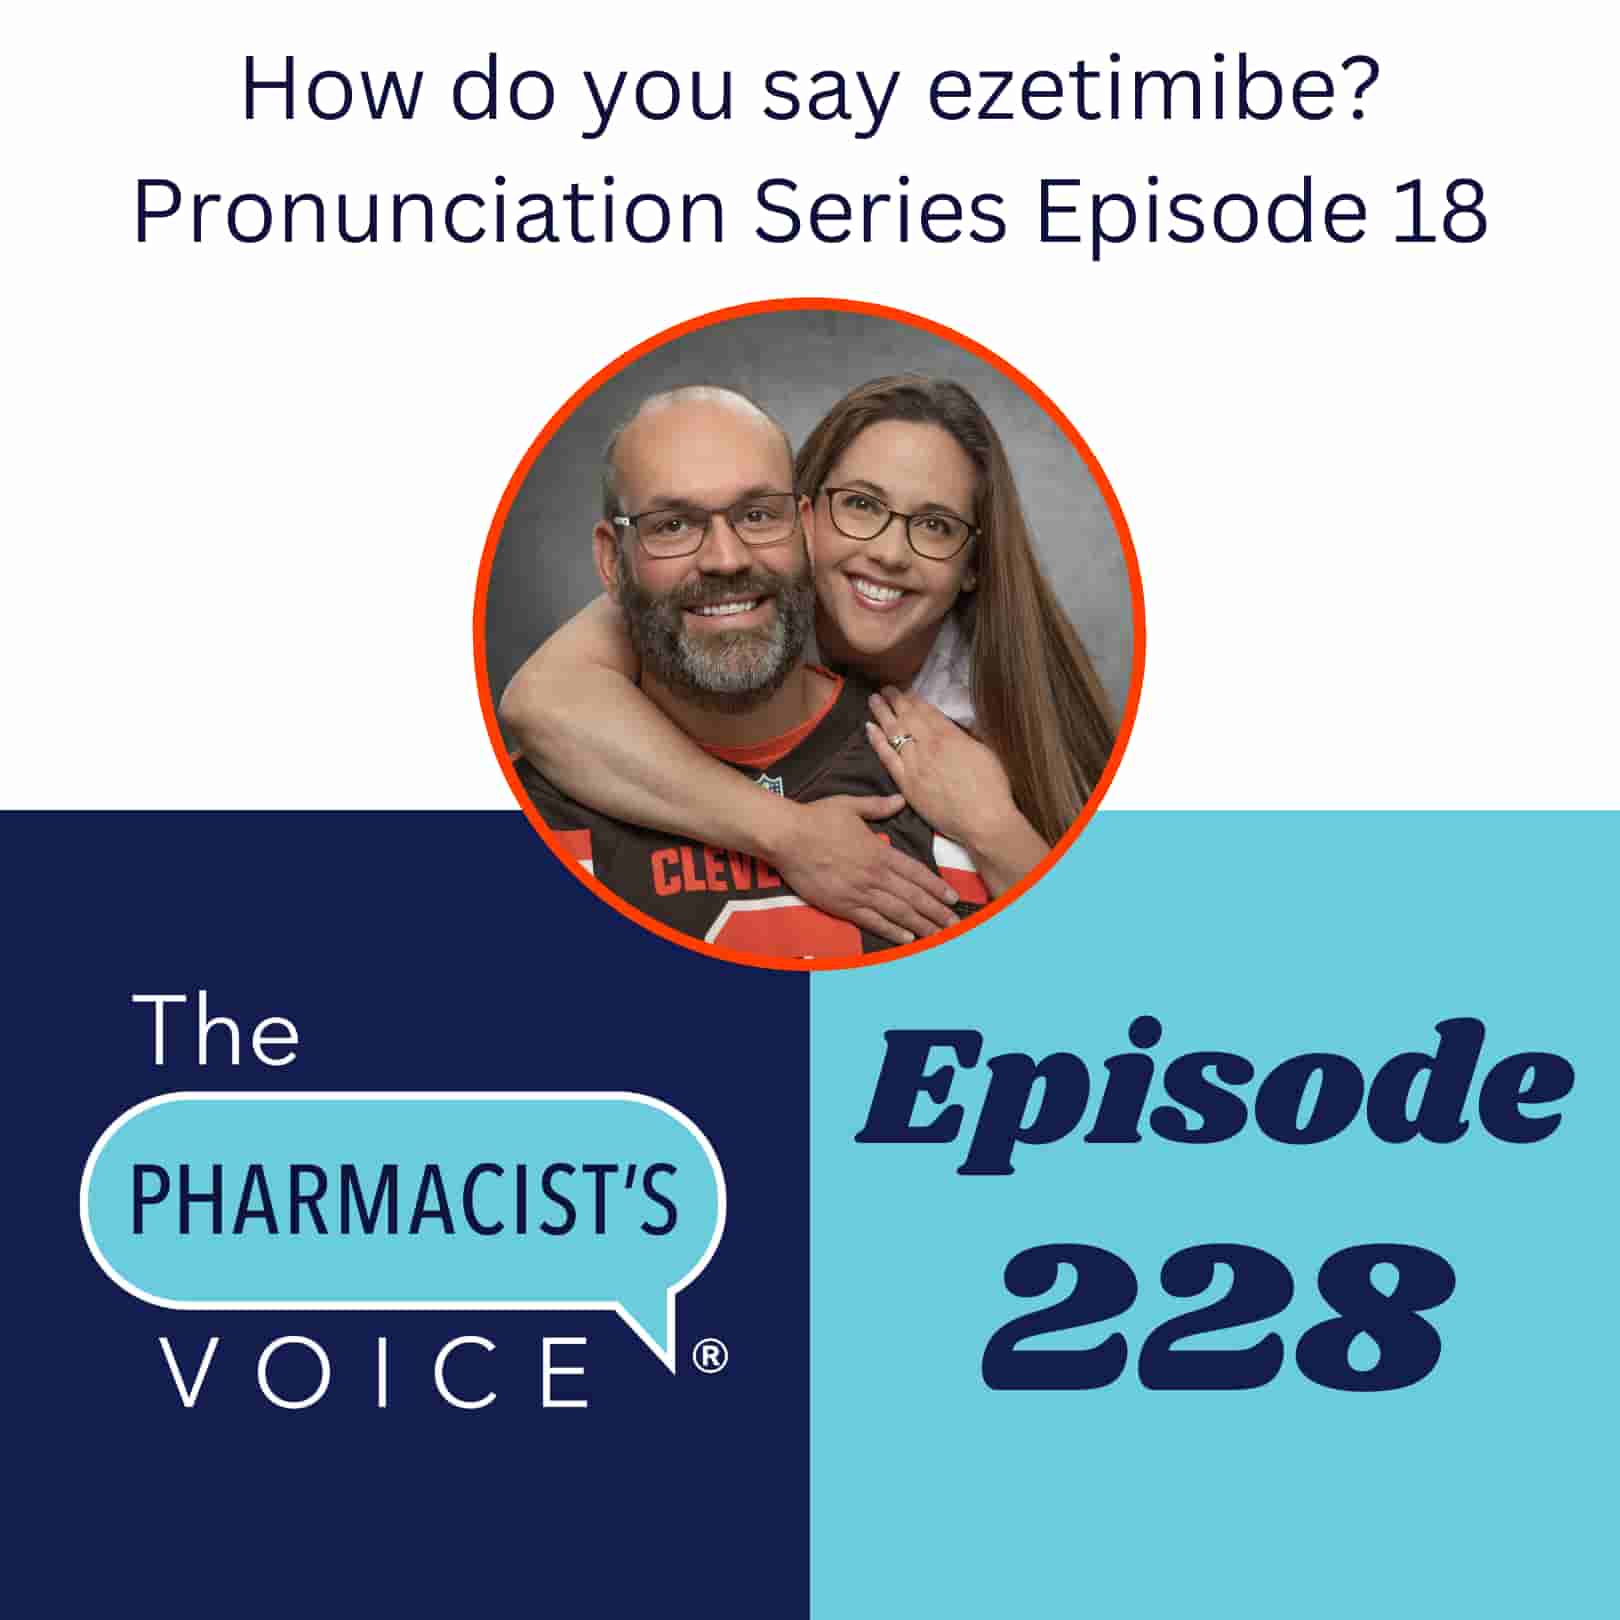 How do you say ezetimibe? Pronunciation Series Episode 18. The Pharmacist's Voice Podcast Episode 228.